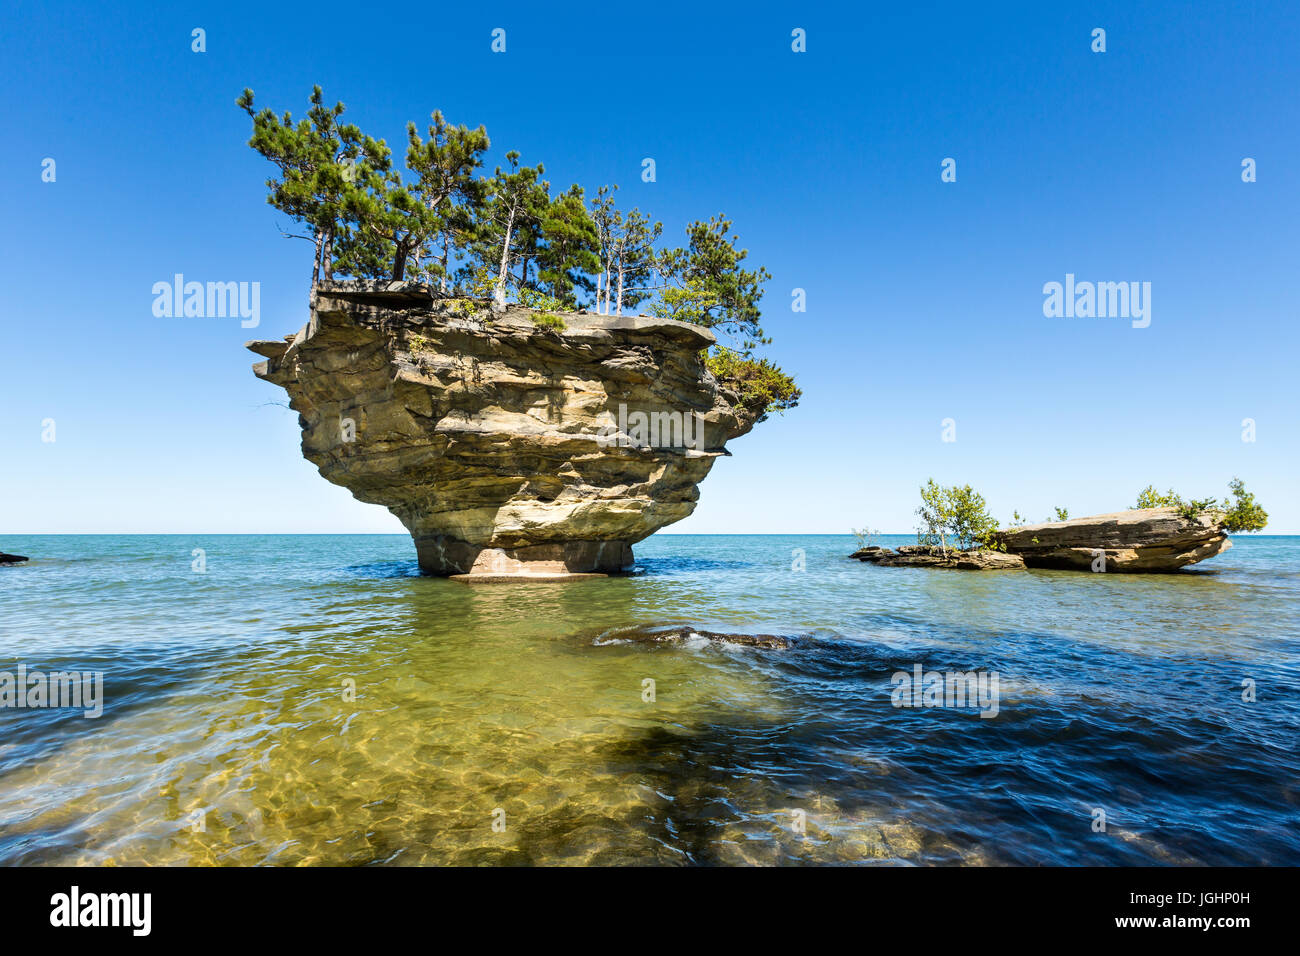 Turnip Rock on Lake Huron in Port Austin Michigan. An underwater view shows rocks under the clear surface of the water Stock Photo